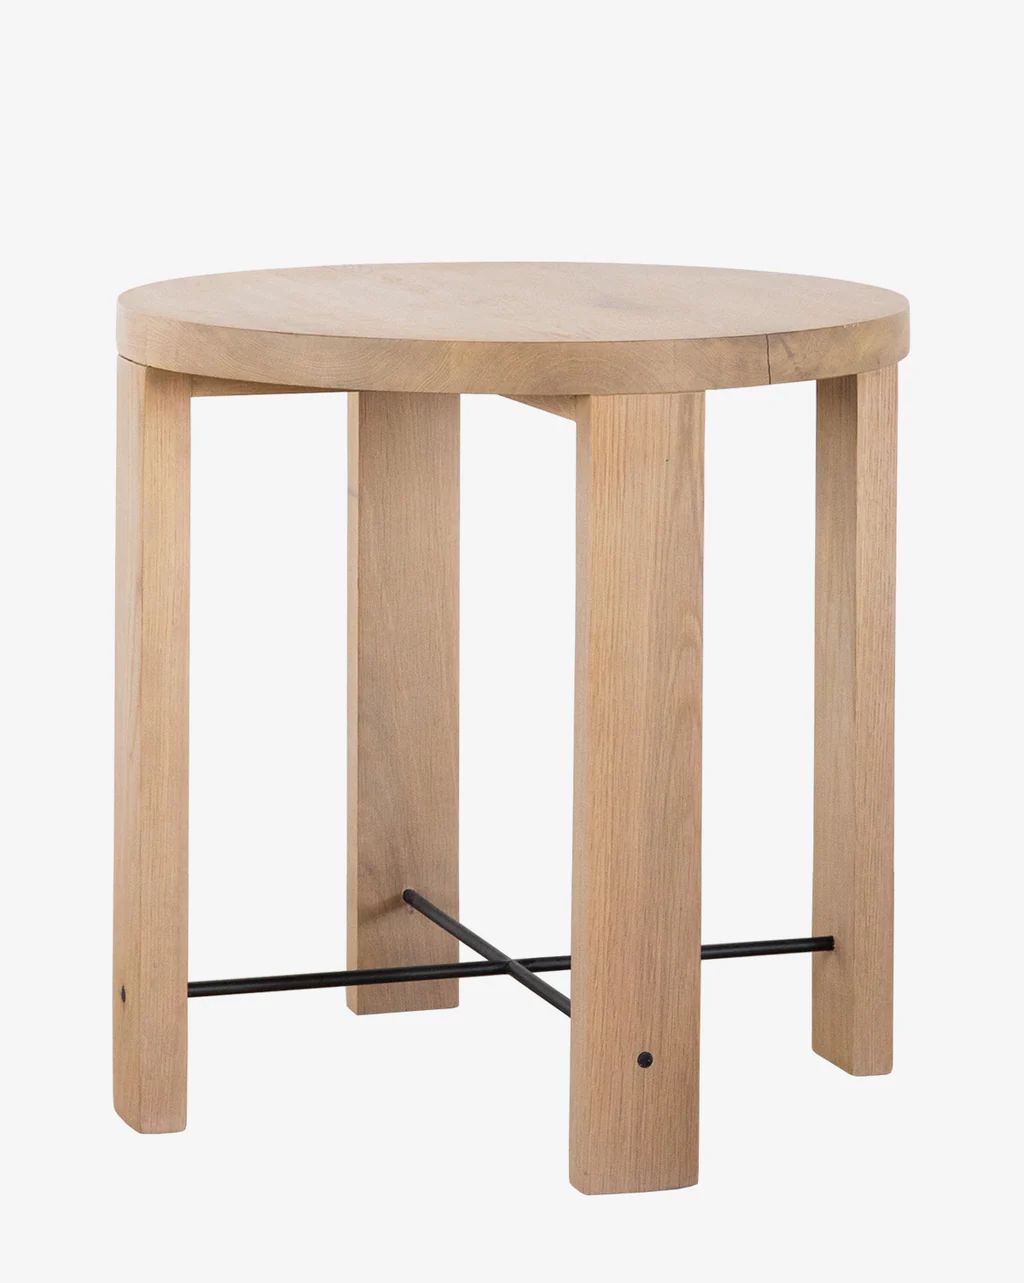 Cora Side Table | McGee & Co.